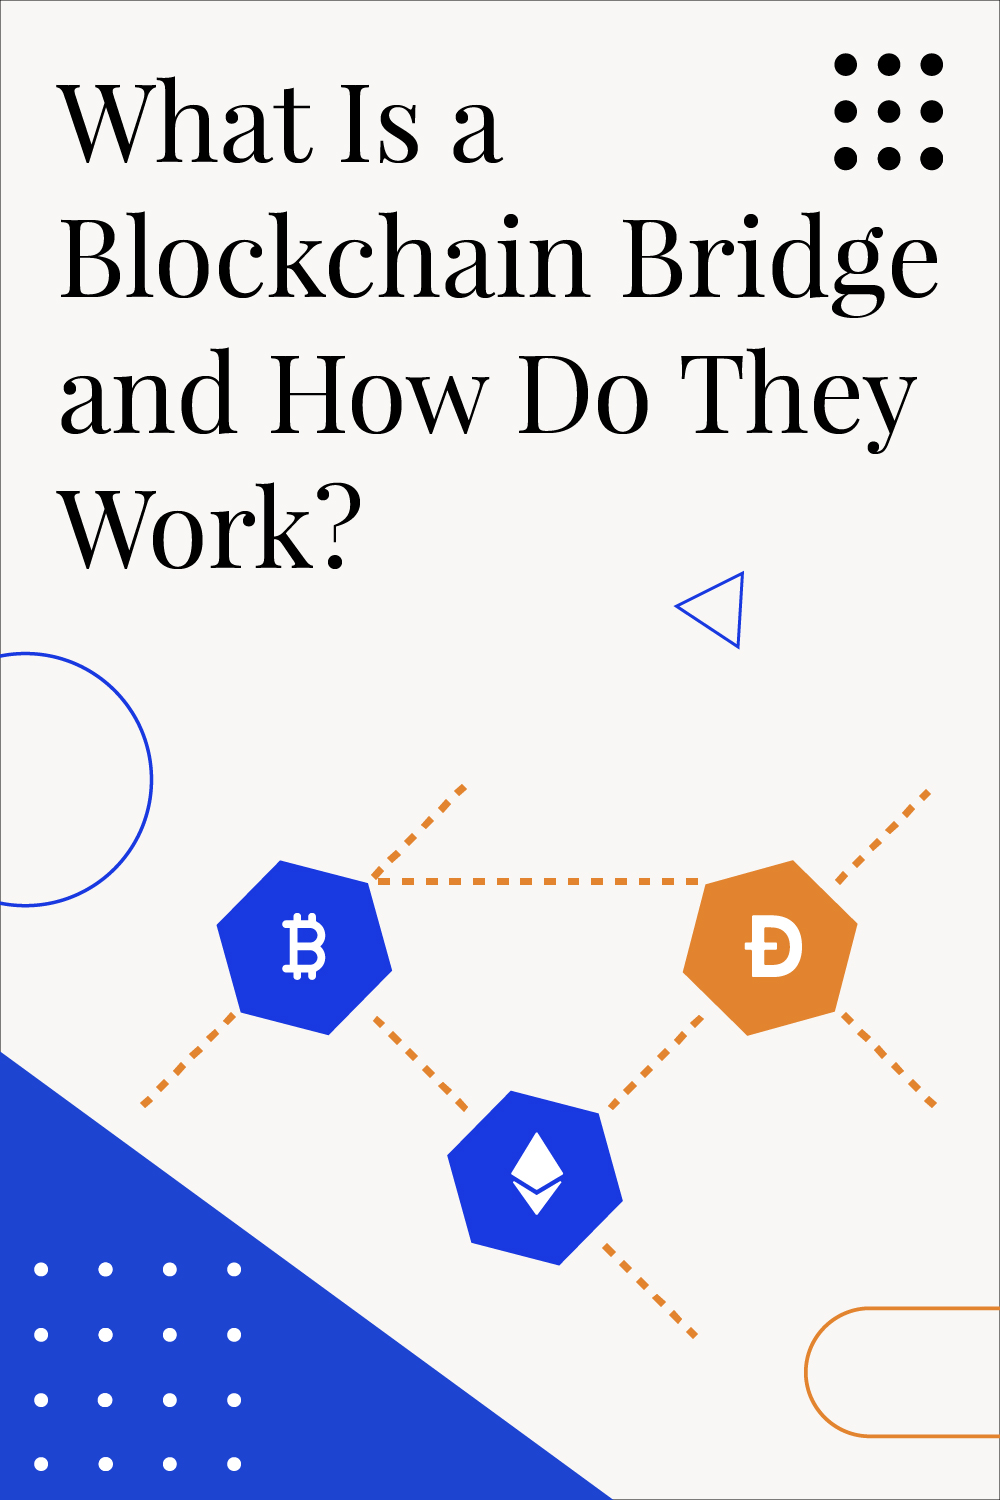 What Is A Blockchain Bridge And How Do They Work?